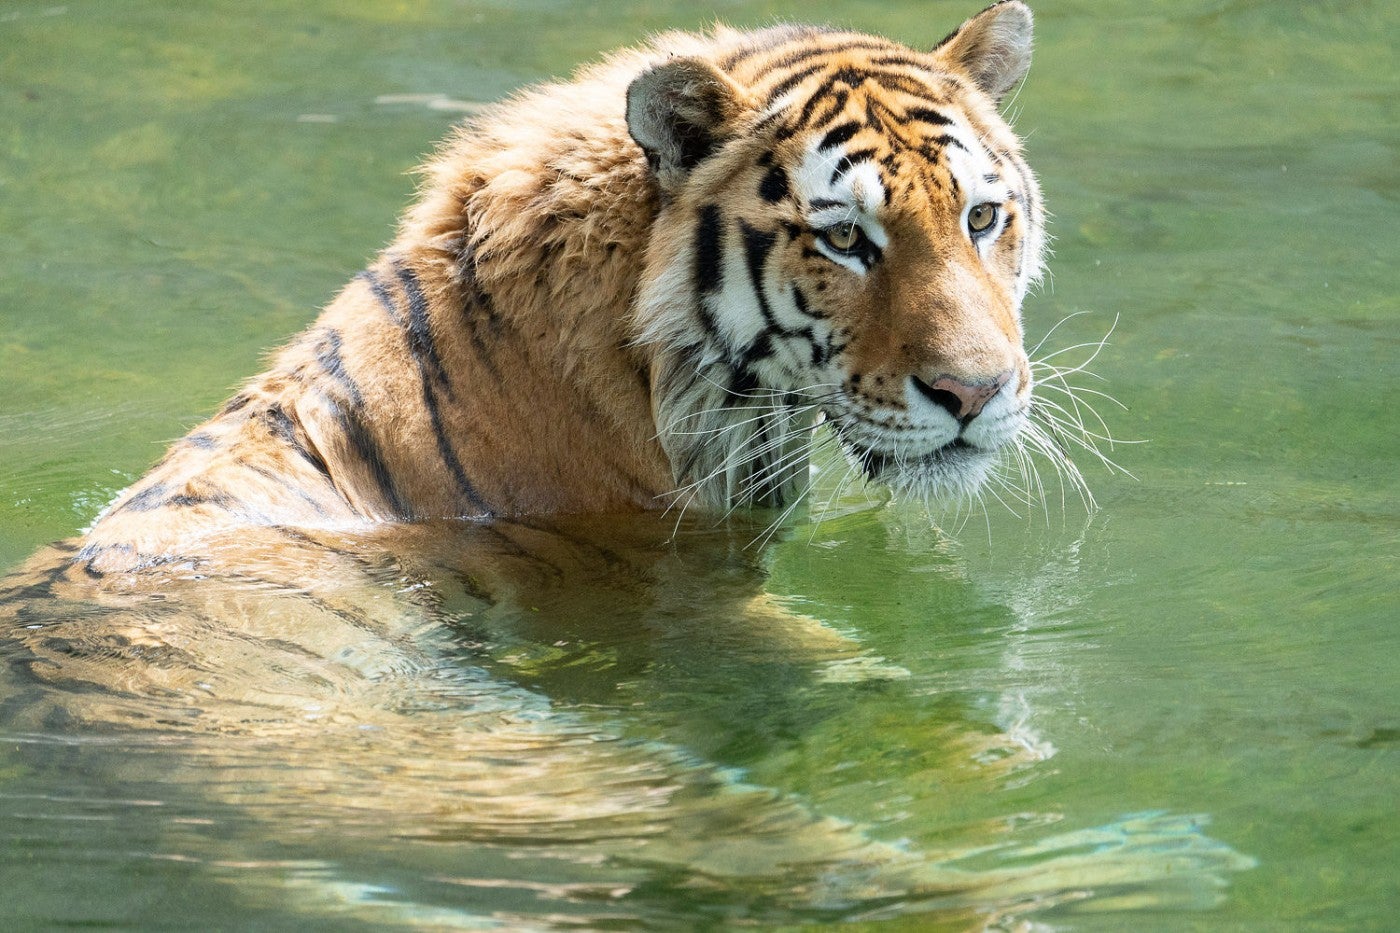 Amur tiger Metis wades in the shallow end of the Great Cats' moat to cool off.